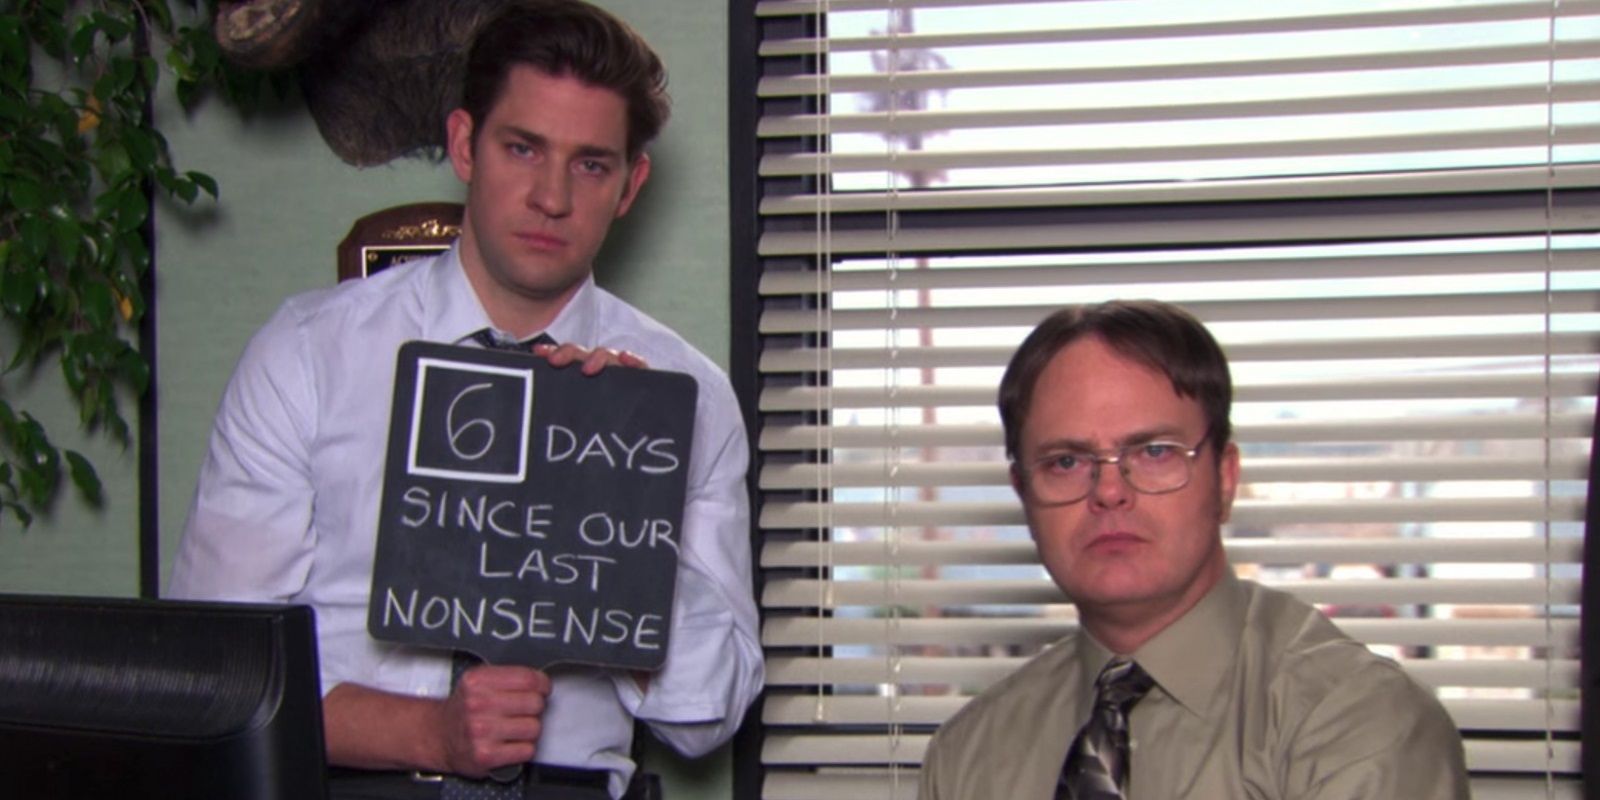 Jim holds up a chalk board that shows how many days the office has been “no-nonsense” for in The Office